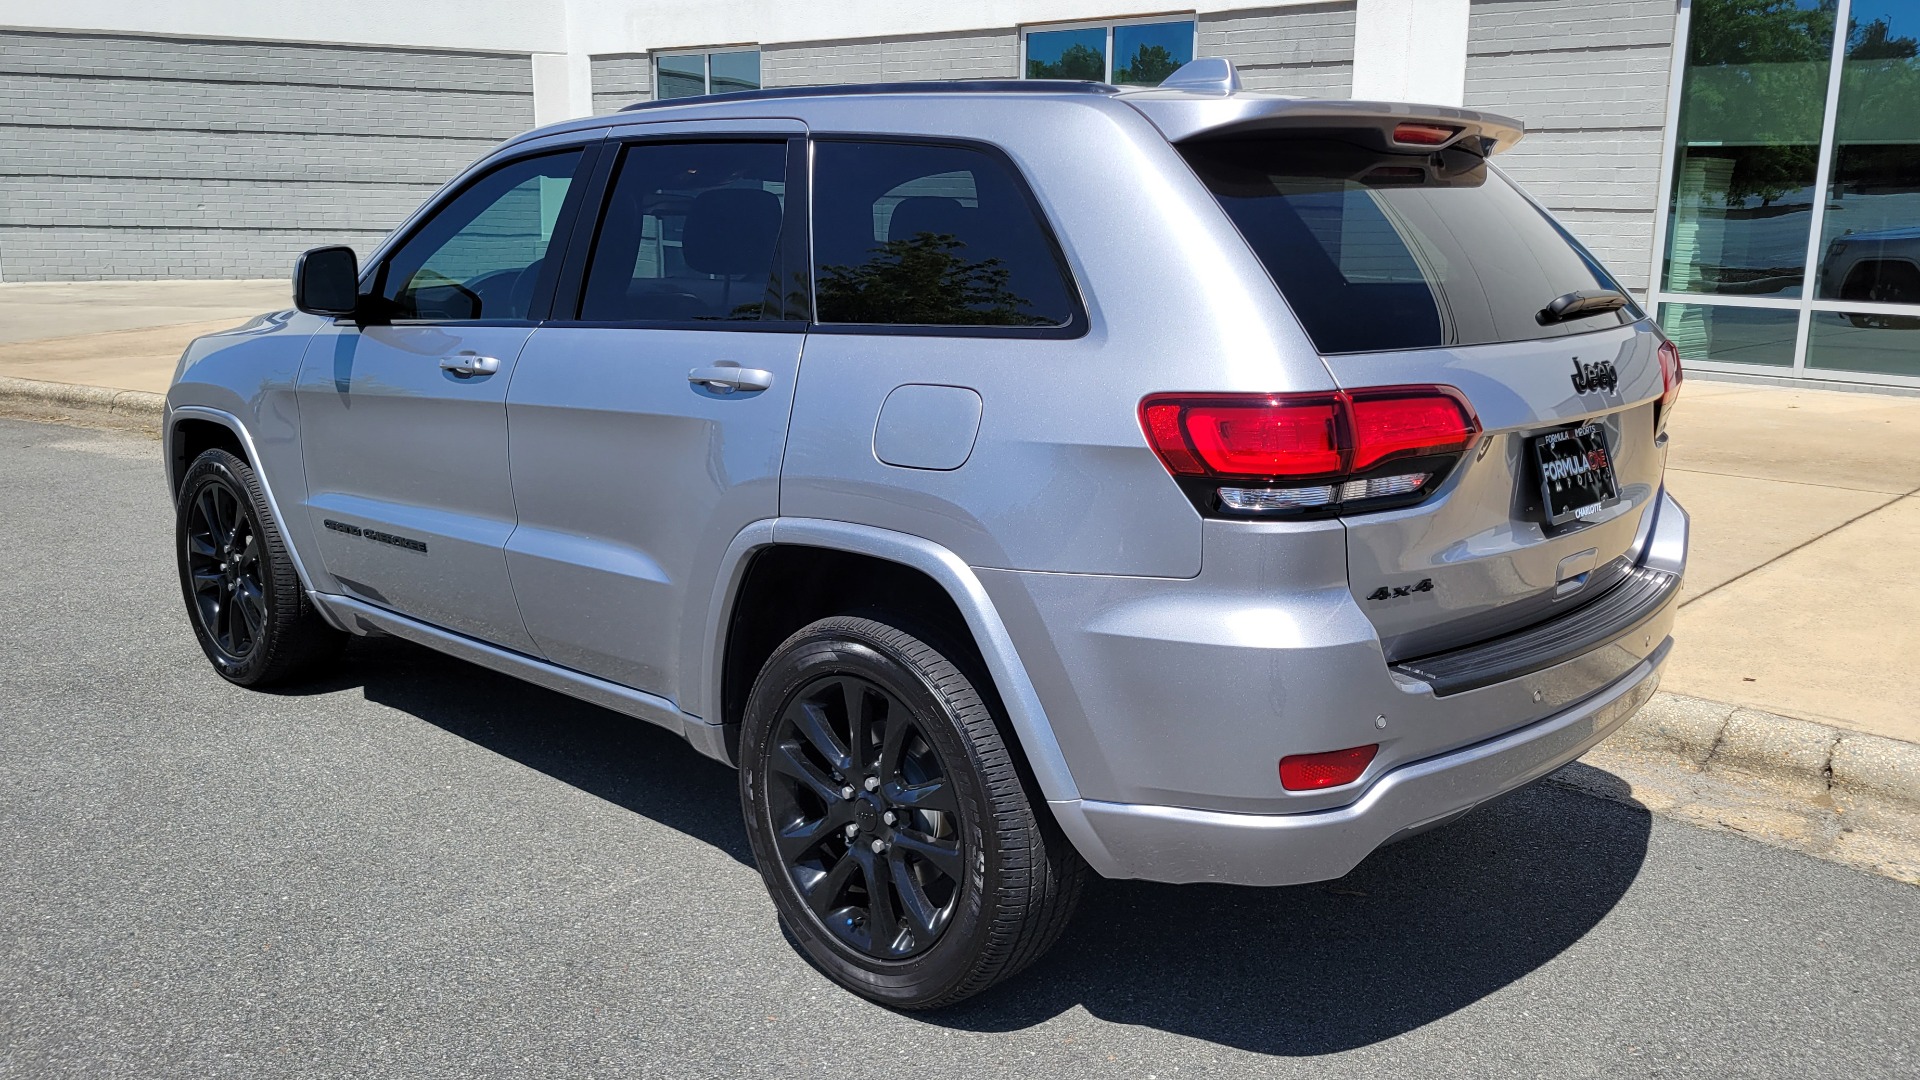 Used 2021 Jeep GRAND CHEROKEE LAREDO X / 3.6L / 4X4 / NAV / ALTITUDE PKG / LEATHER / REARVIEW for sale $39,995 at Formula Imports in Charlotte NC 28227 6